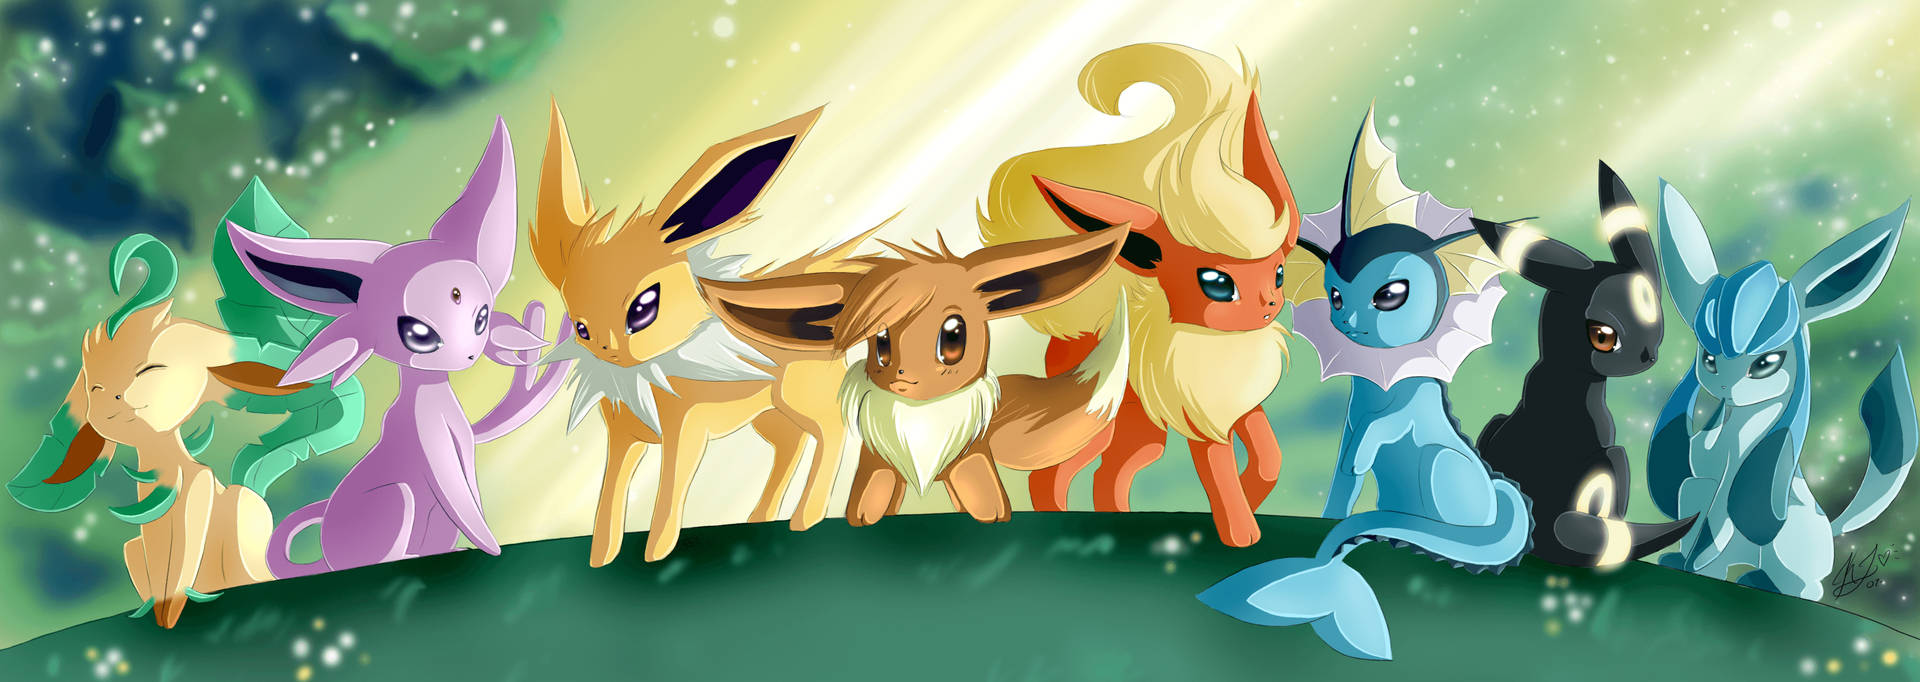 Leafeon And The Eeveelution Wallpaper